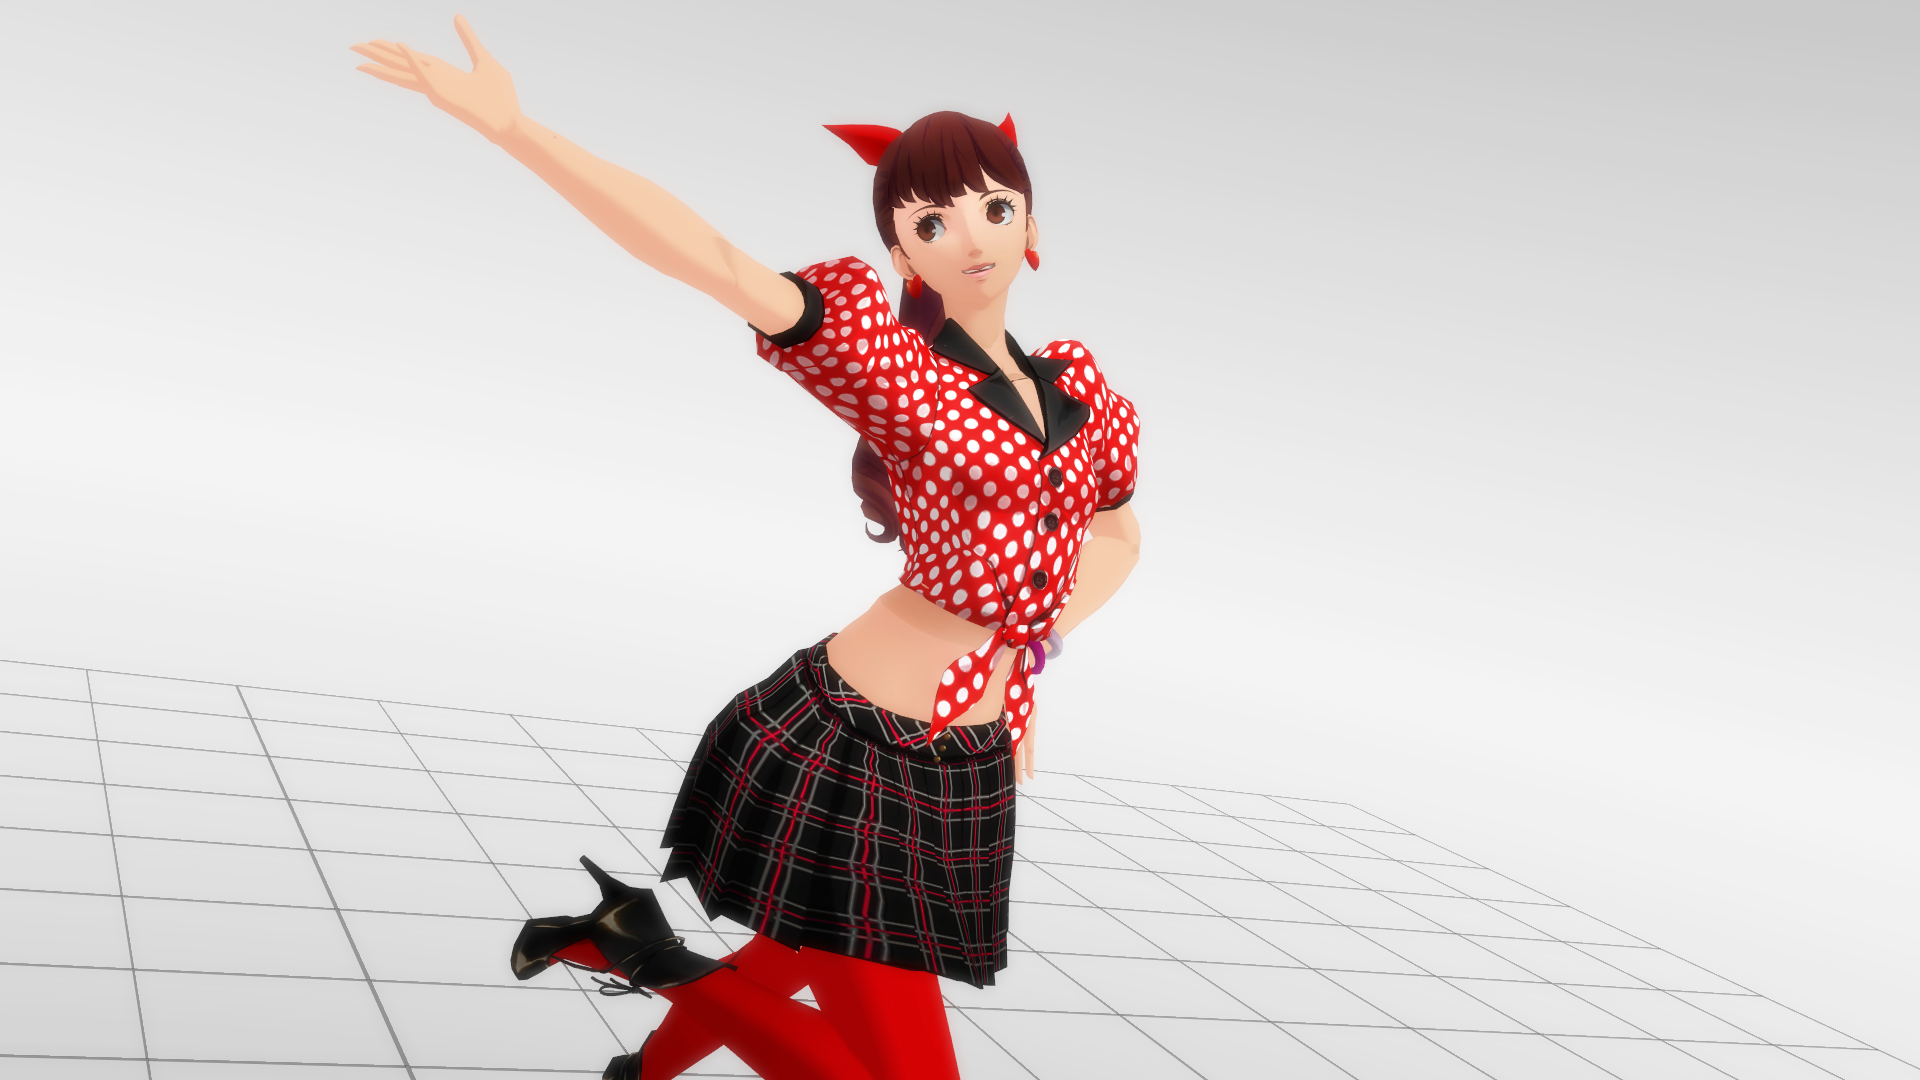 [Persona MMD] Sumire Yoshizawa - Dance Outfit DL by nobodypls on DeviantArt